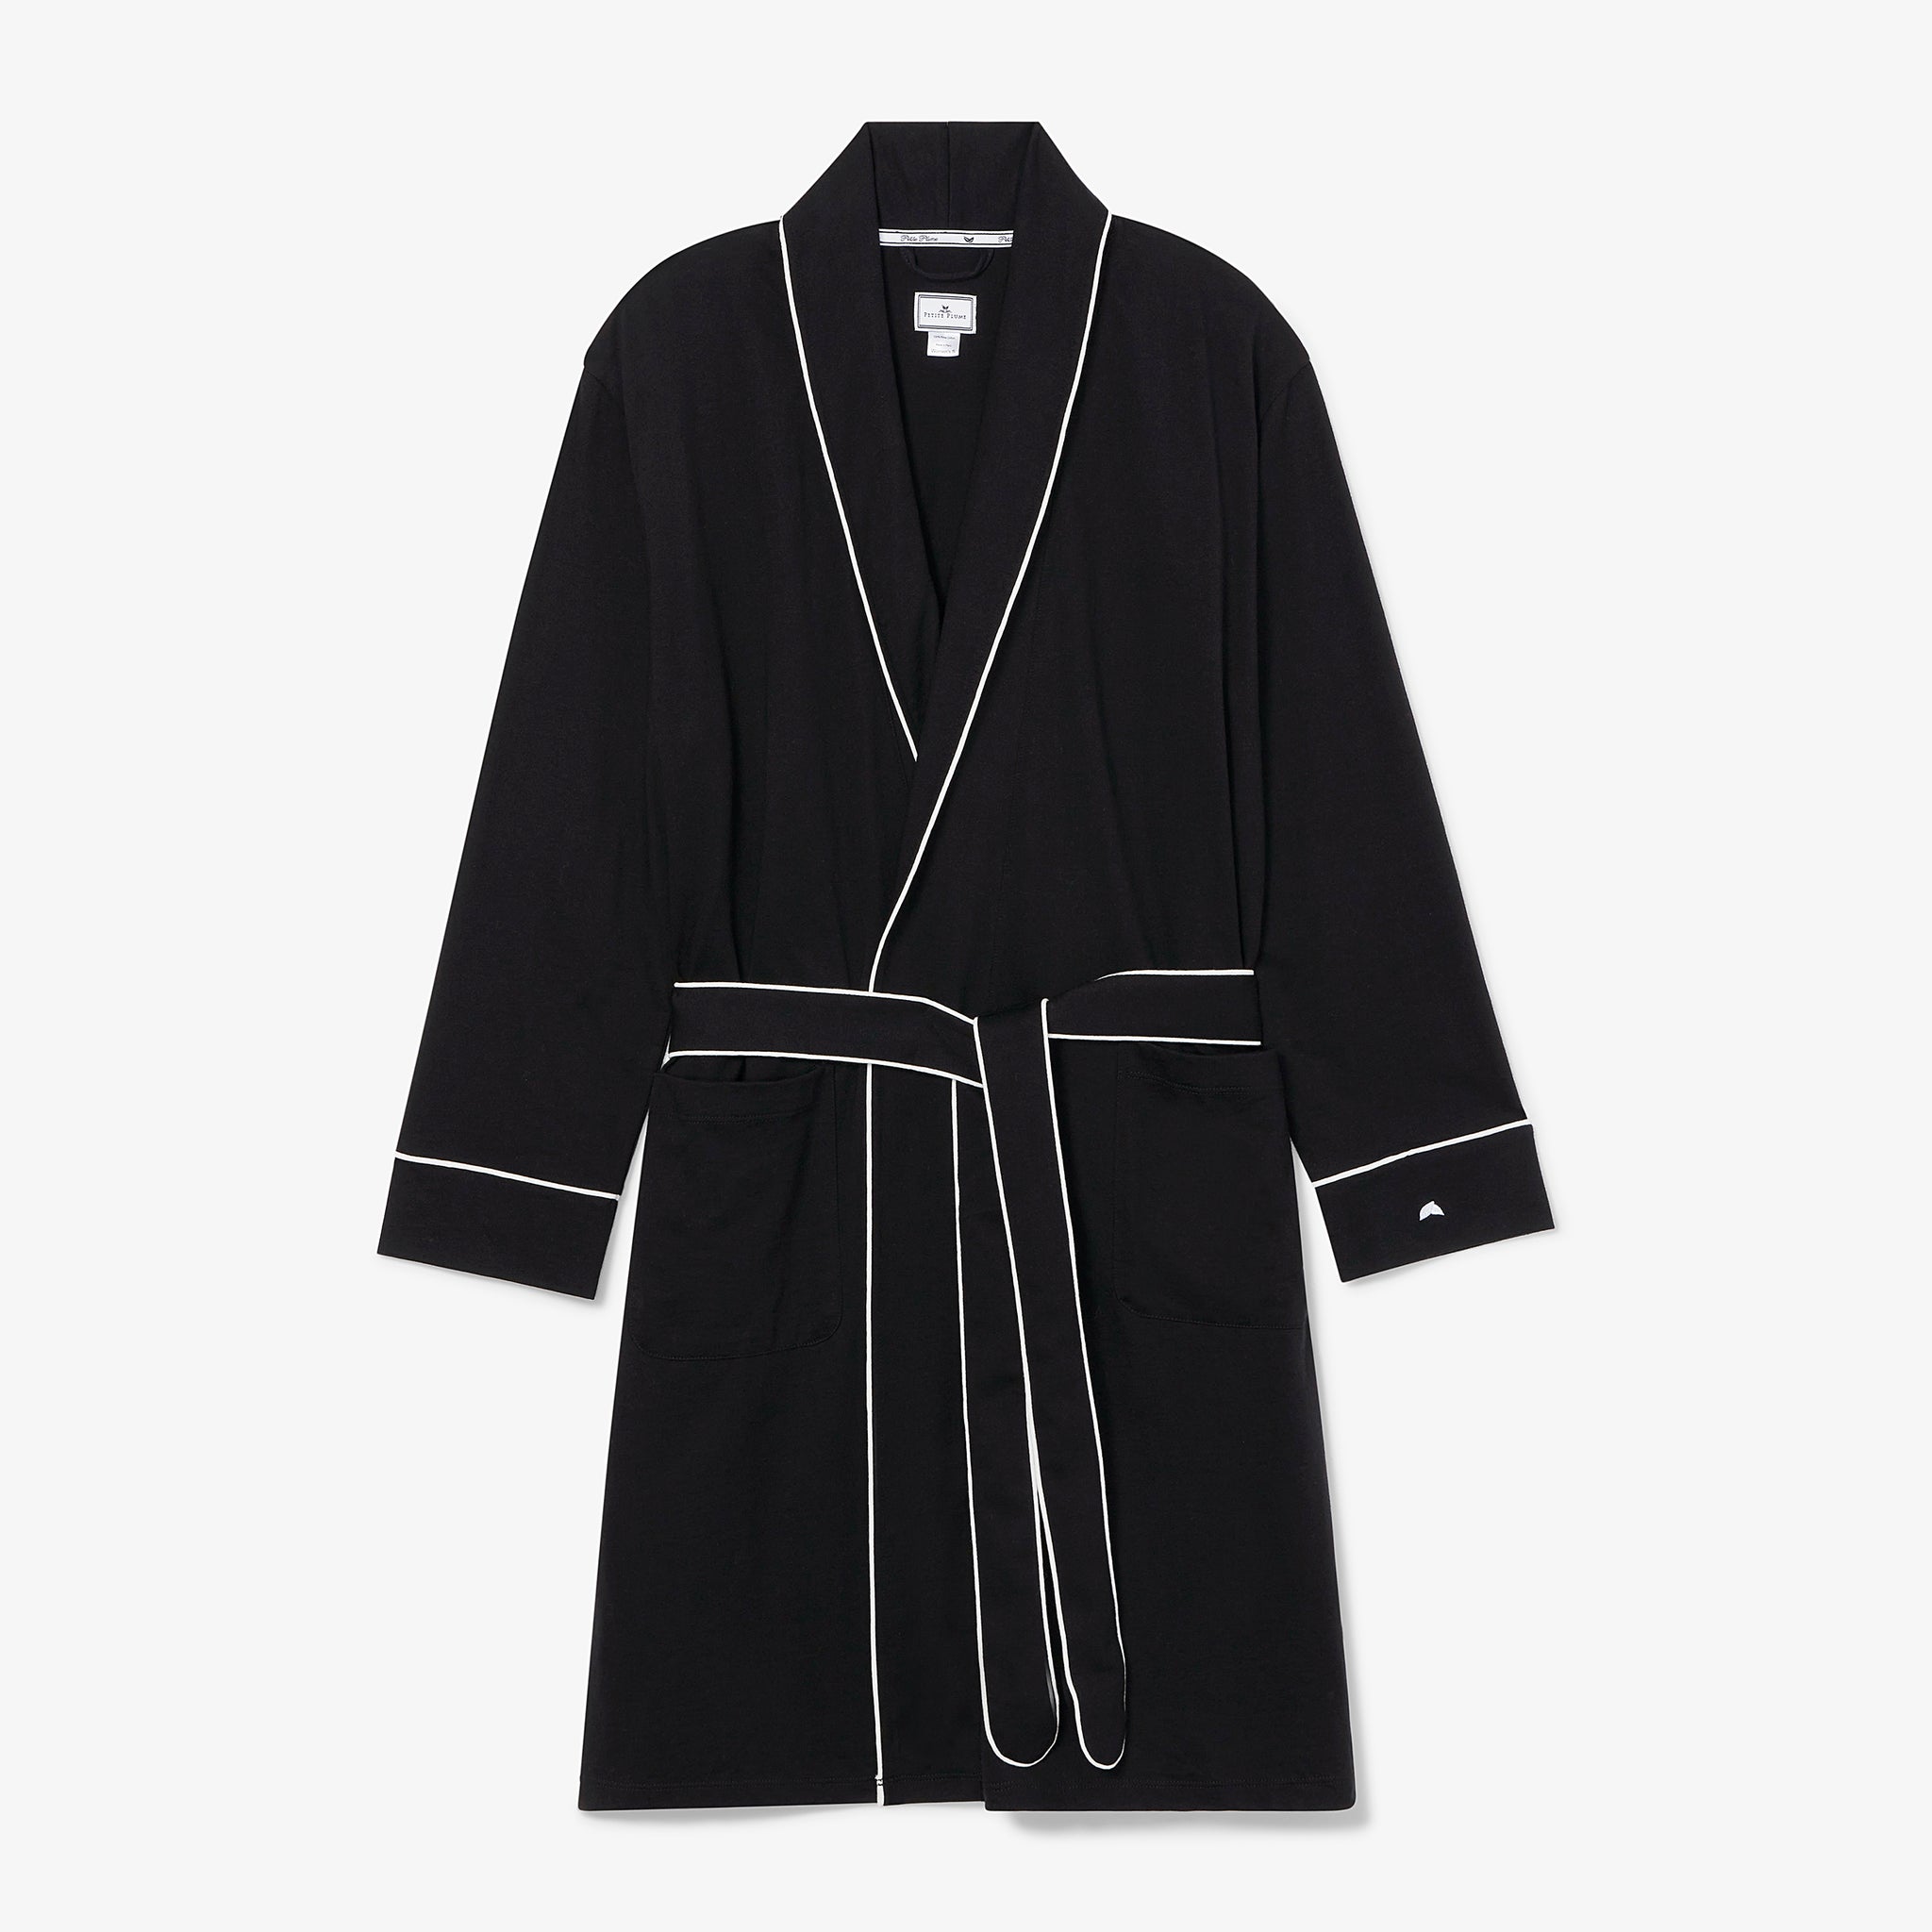 Packshot image of the Petite Plume x M.M. Luxe Pima Robe in Black